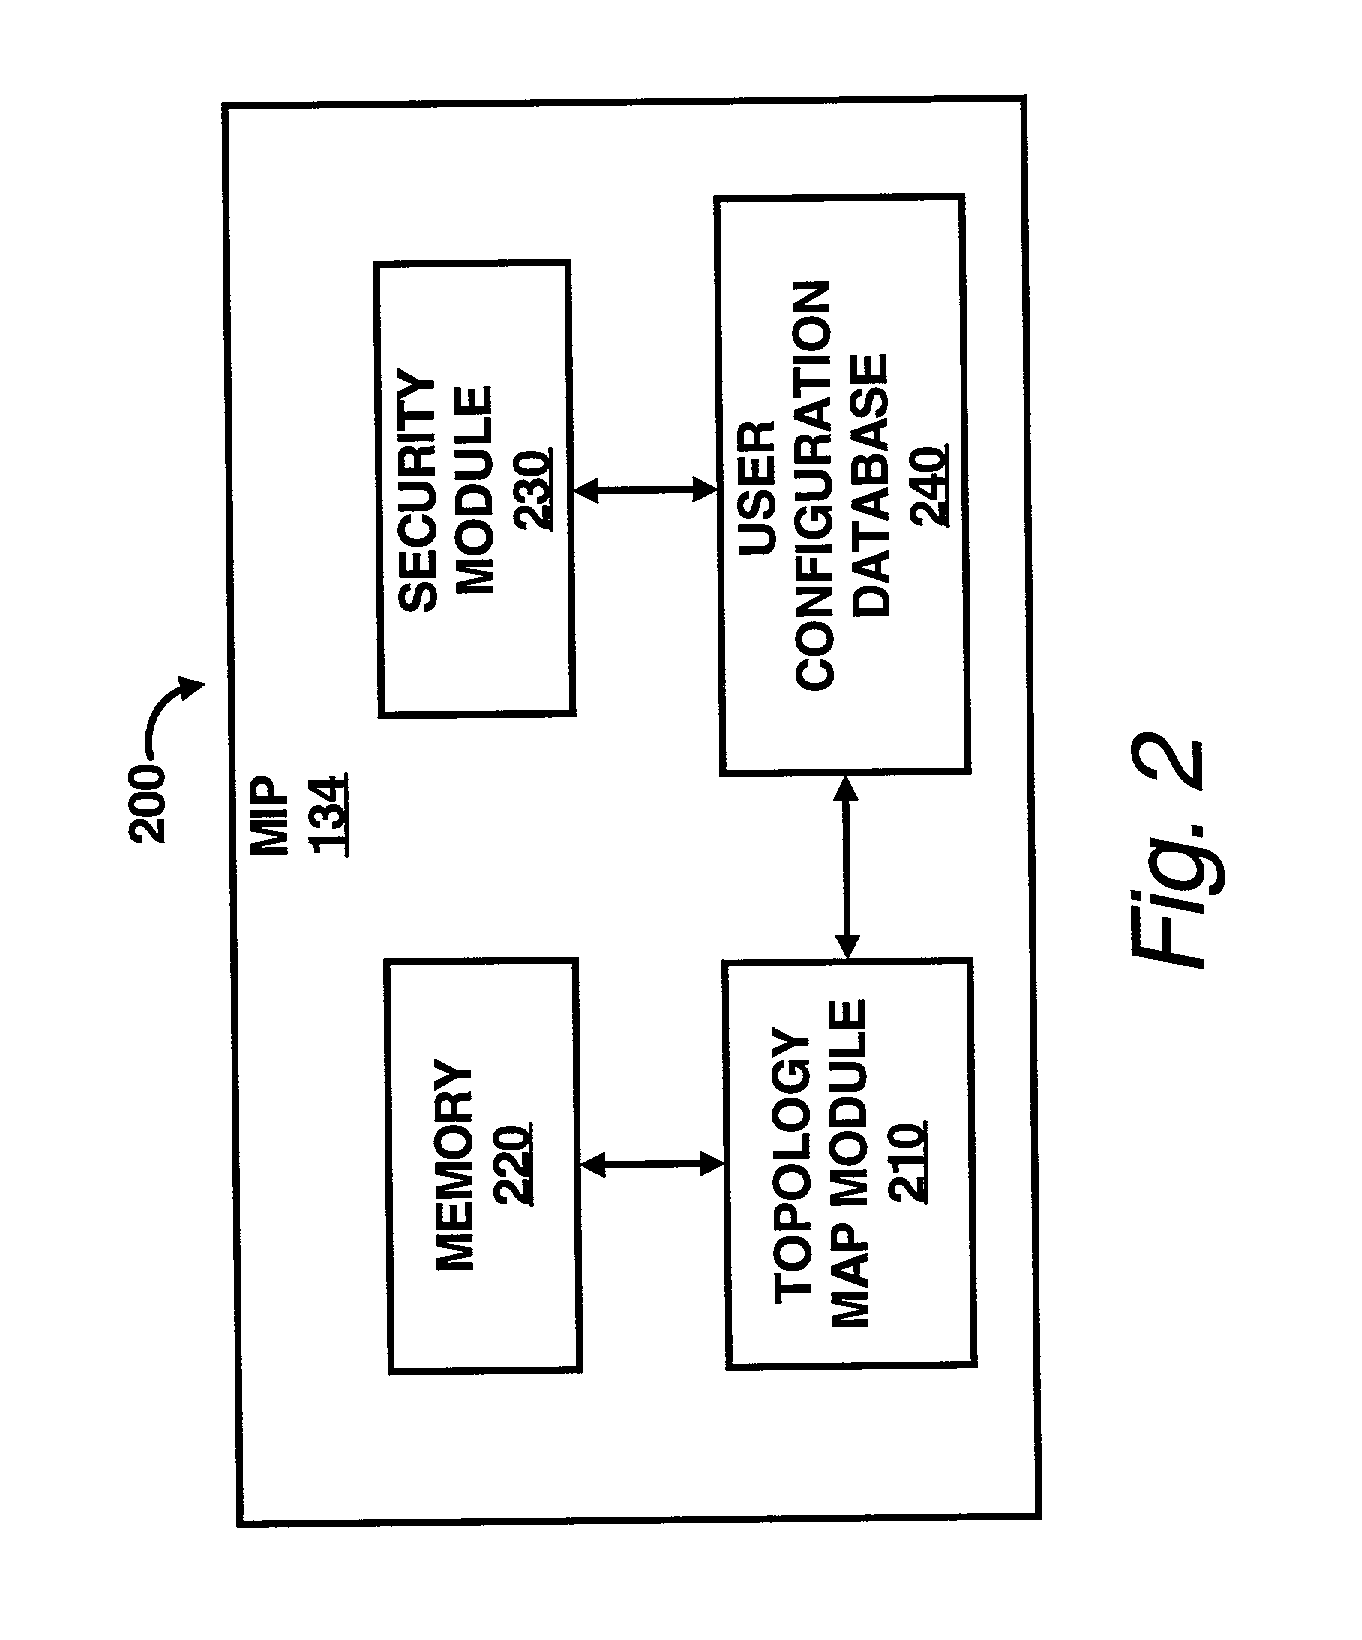 System for secure access to information provided by a web application